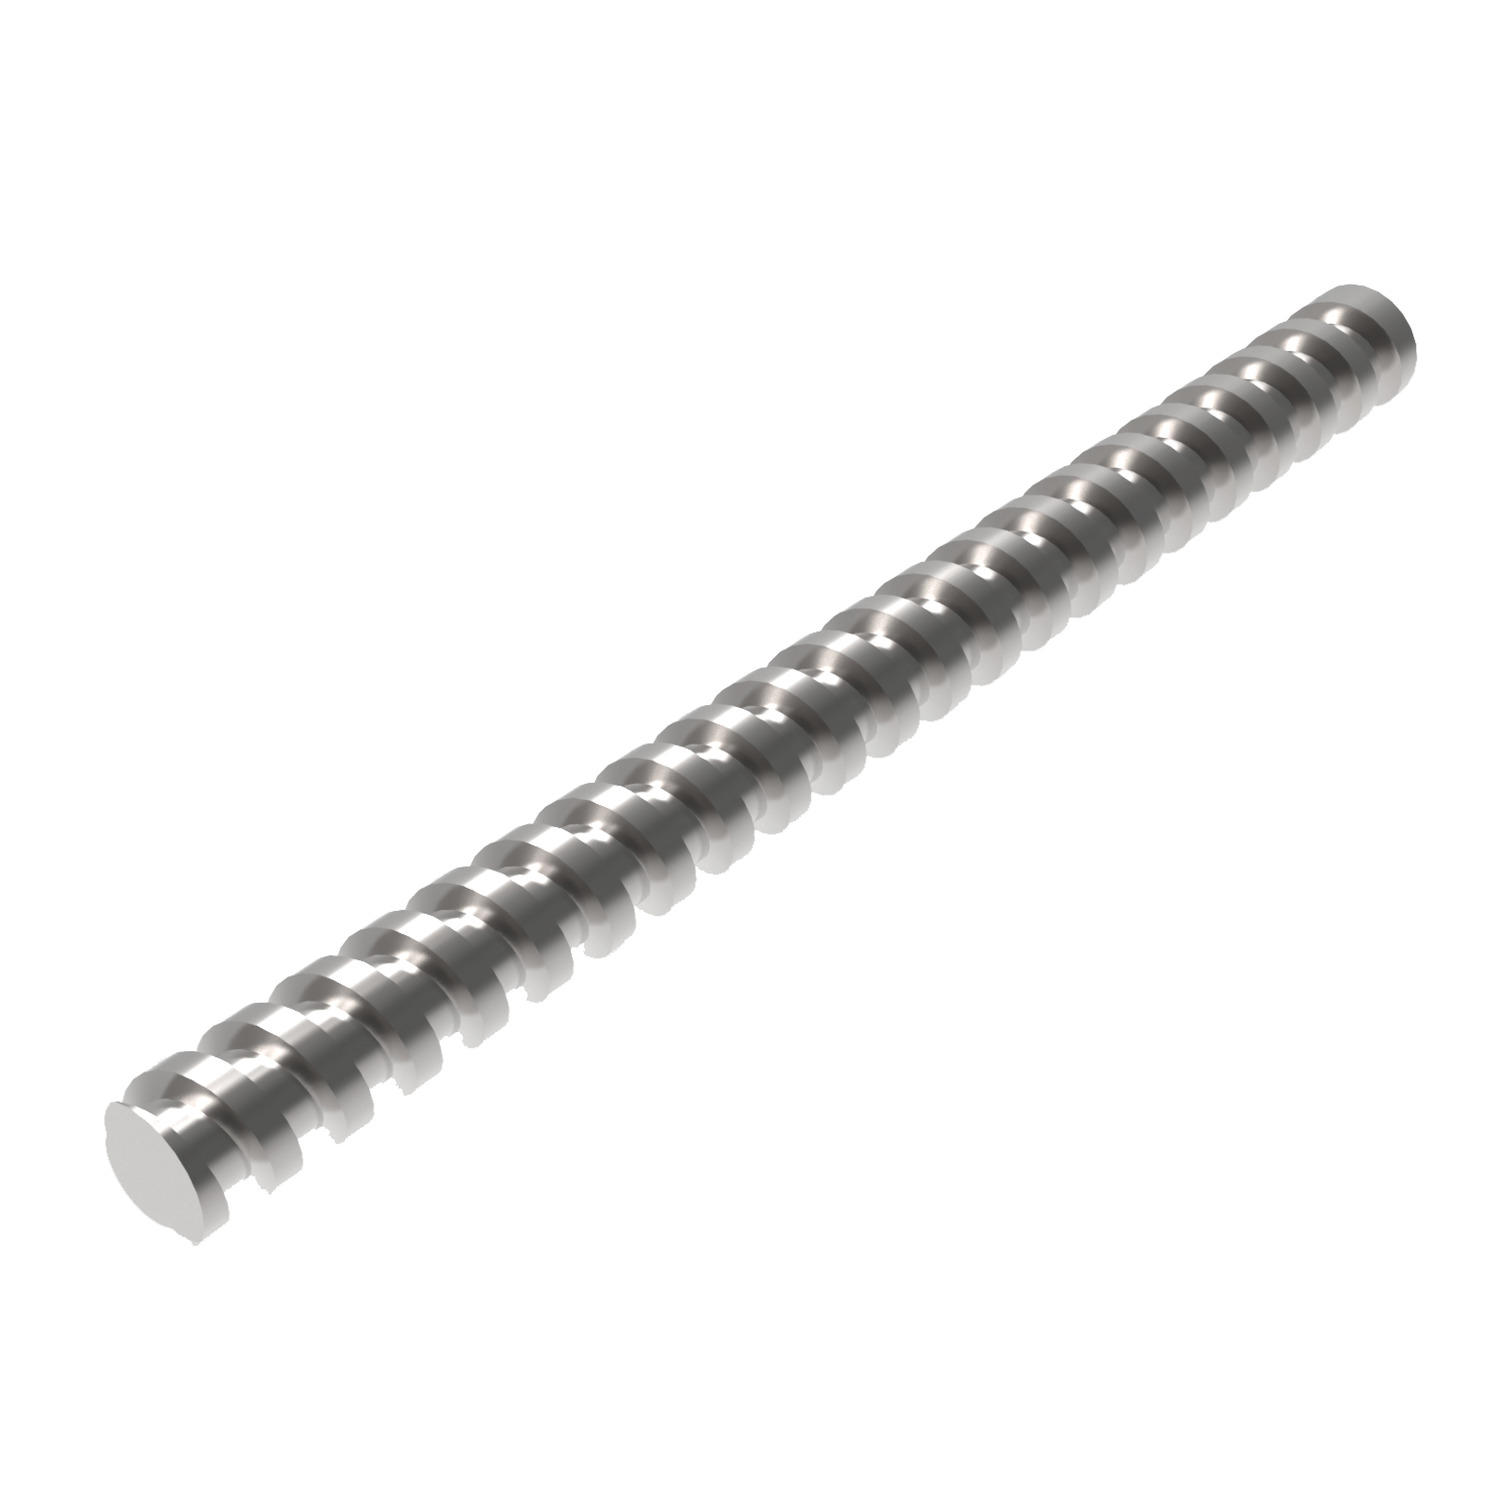 Ball Screws Rolled ball screws in sizes from 16x5mm up to 80x10mm. Typically stocked in 3000mm lengths but available up to 6000mm.